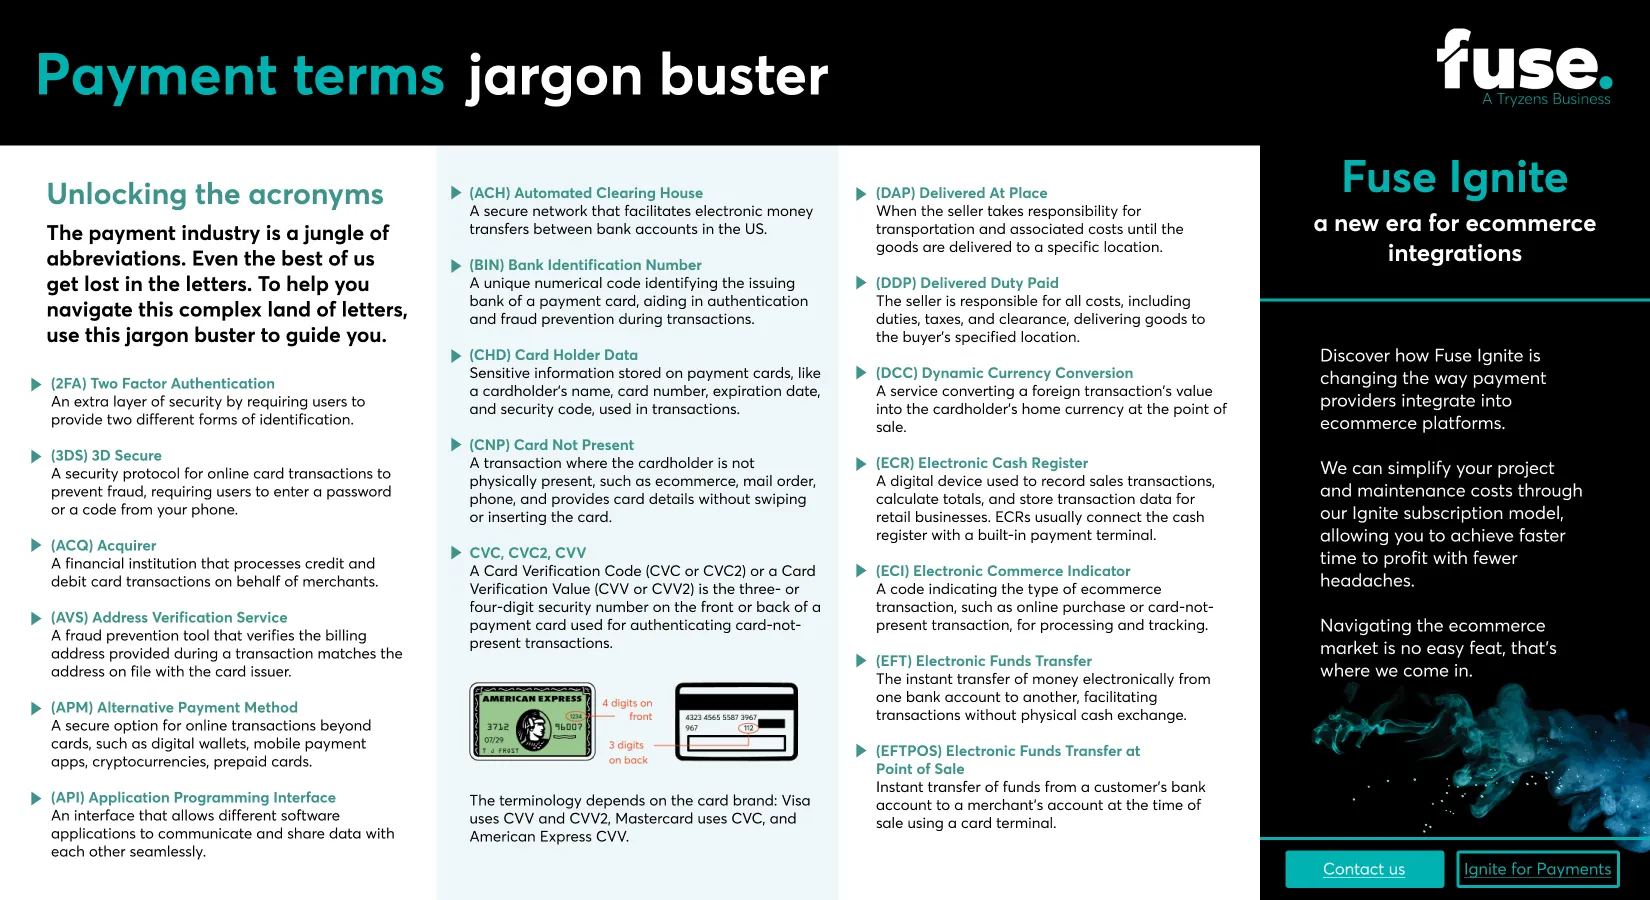 Fuse Payment Terms jargon buster